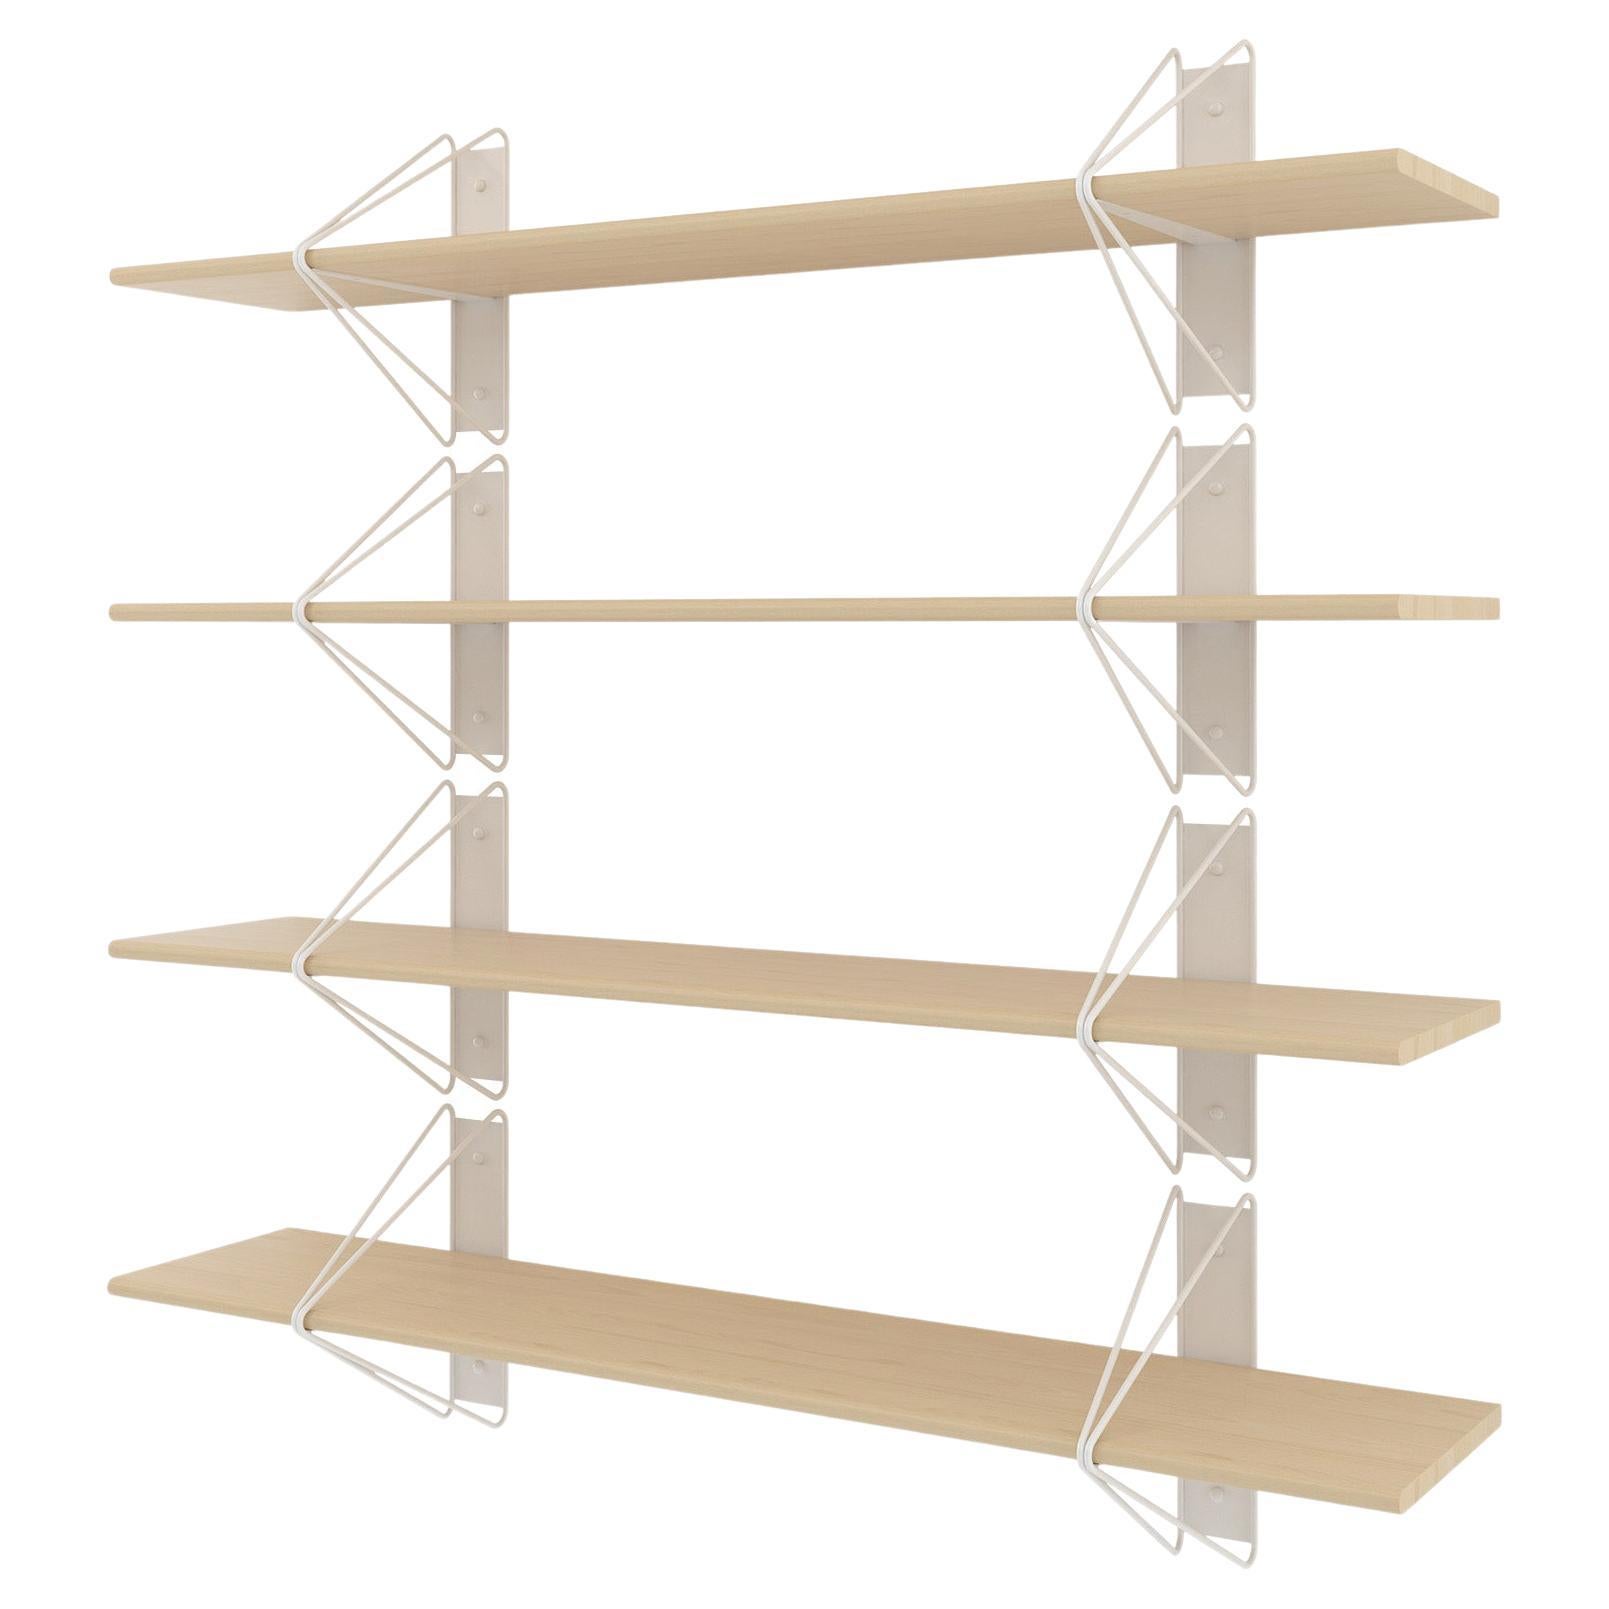 Set of 4 Strut Shelves from Souda, 52in, White and Maple, Made to Order